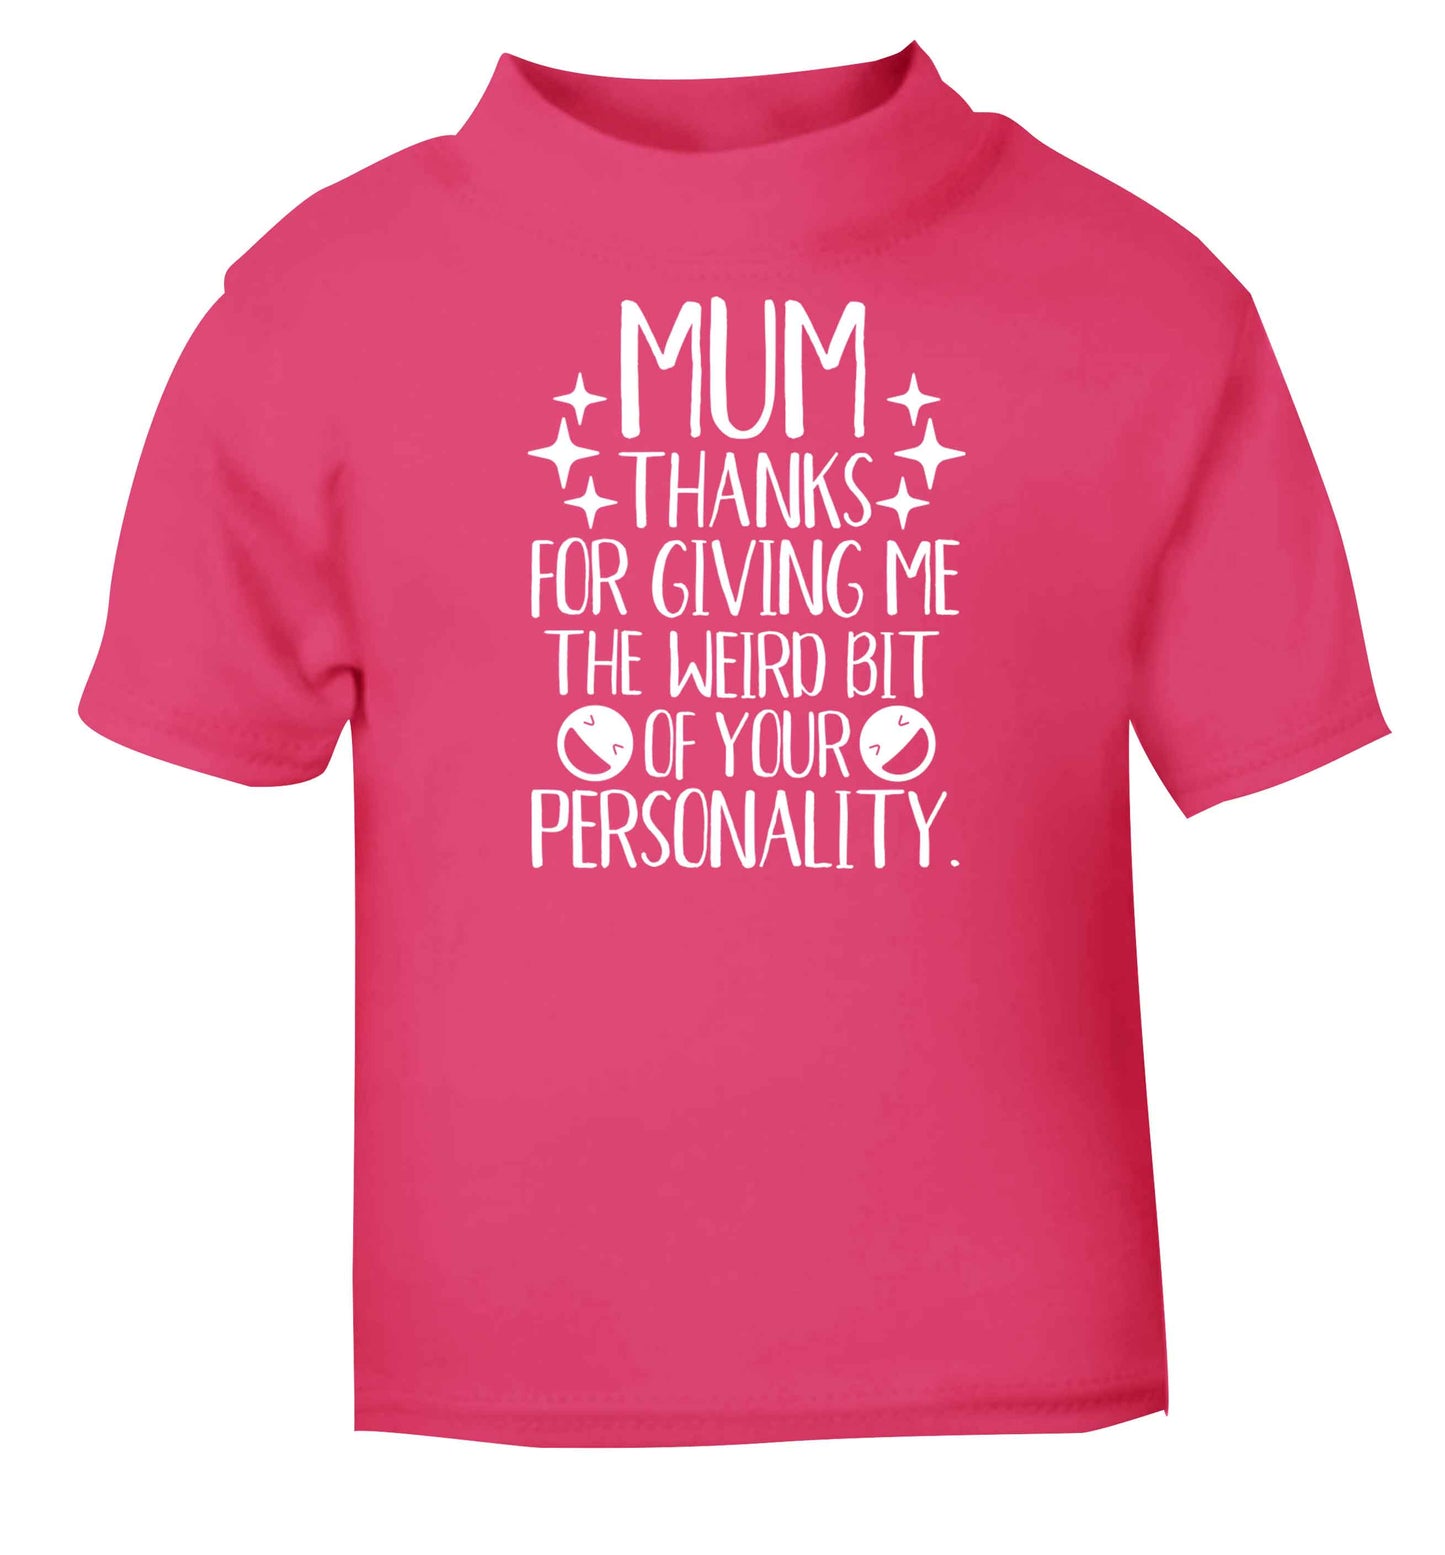 Mum, I love you more than halloumi and if you know me at all you know how deep that is pink baby toddler Tshirt 2 Years